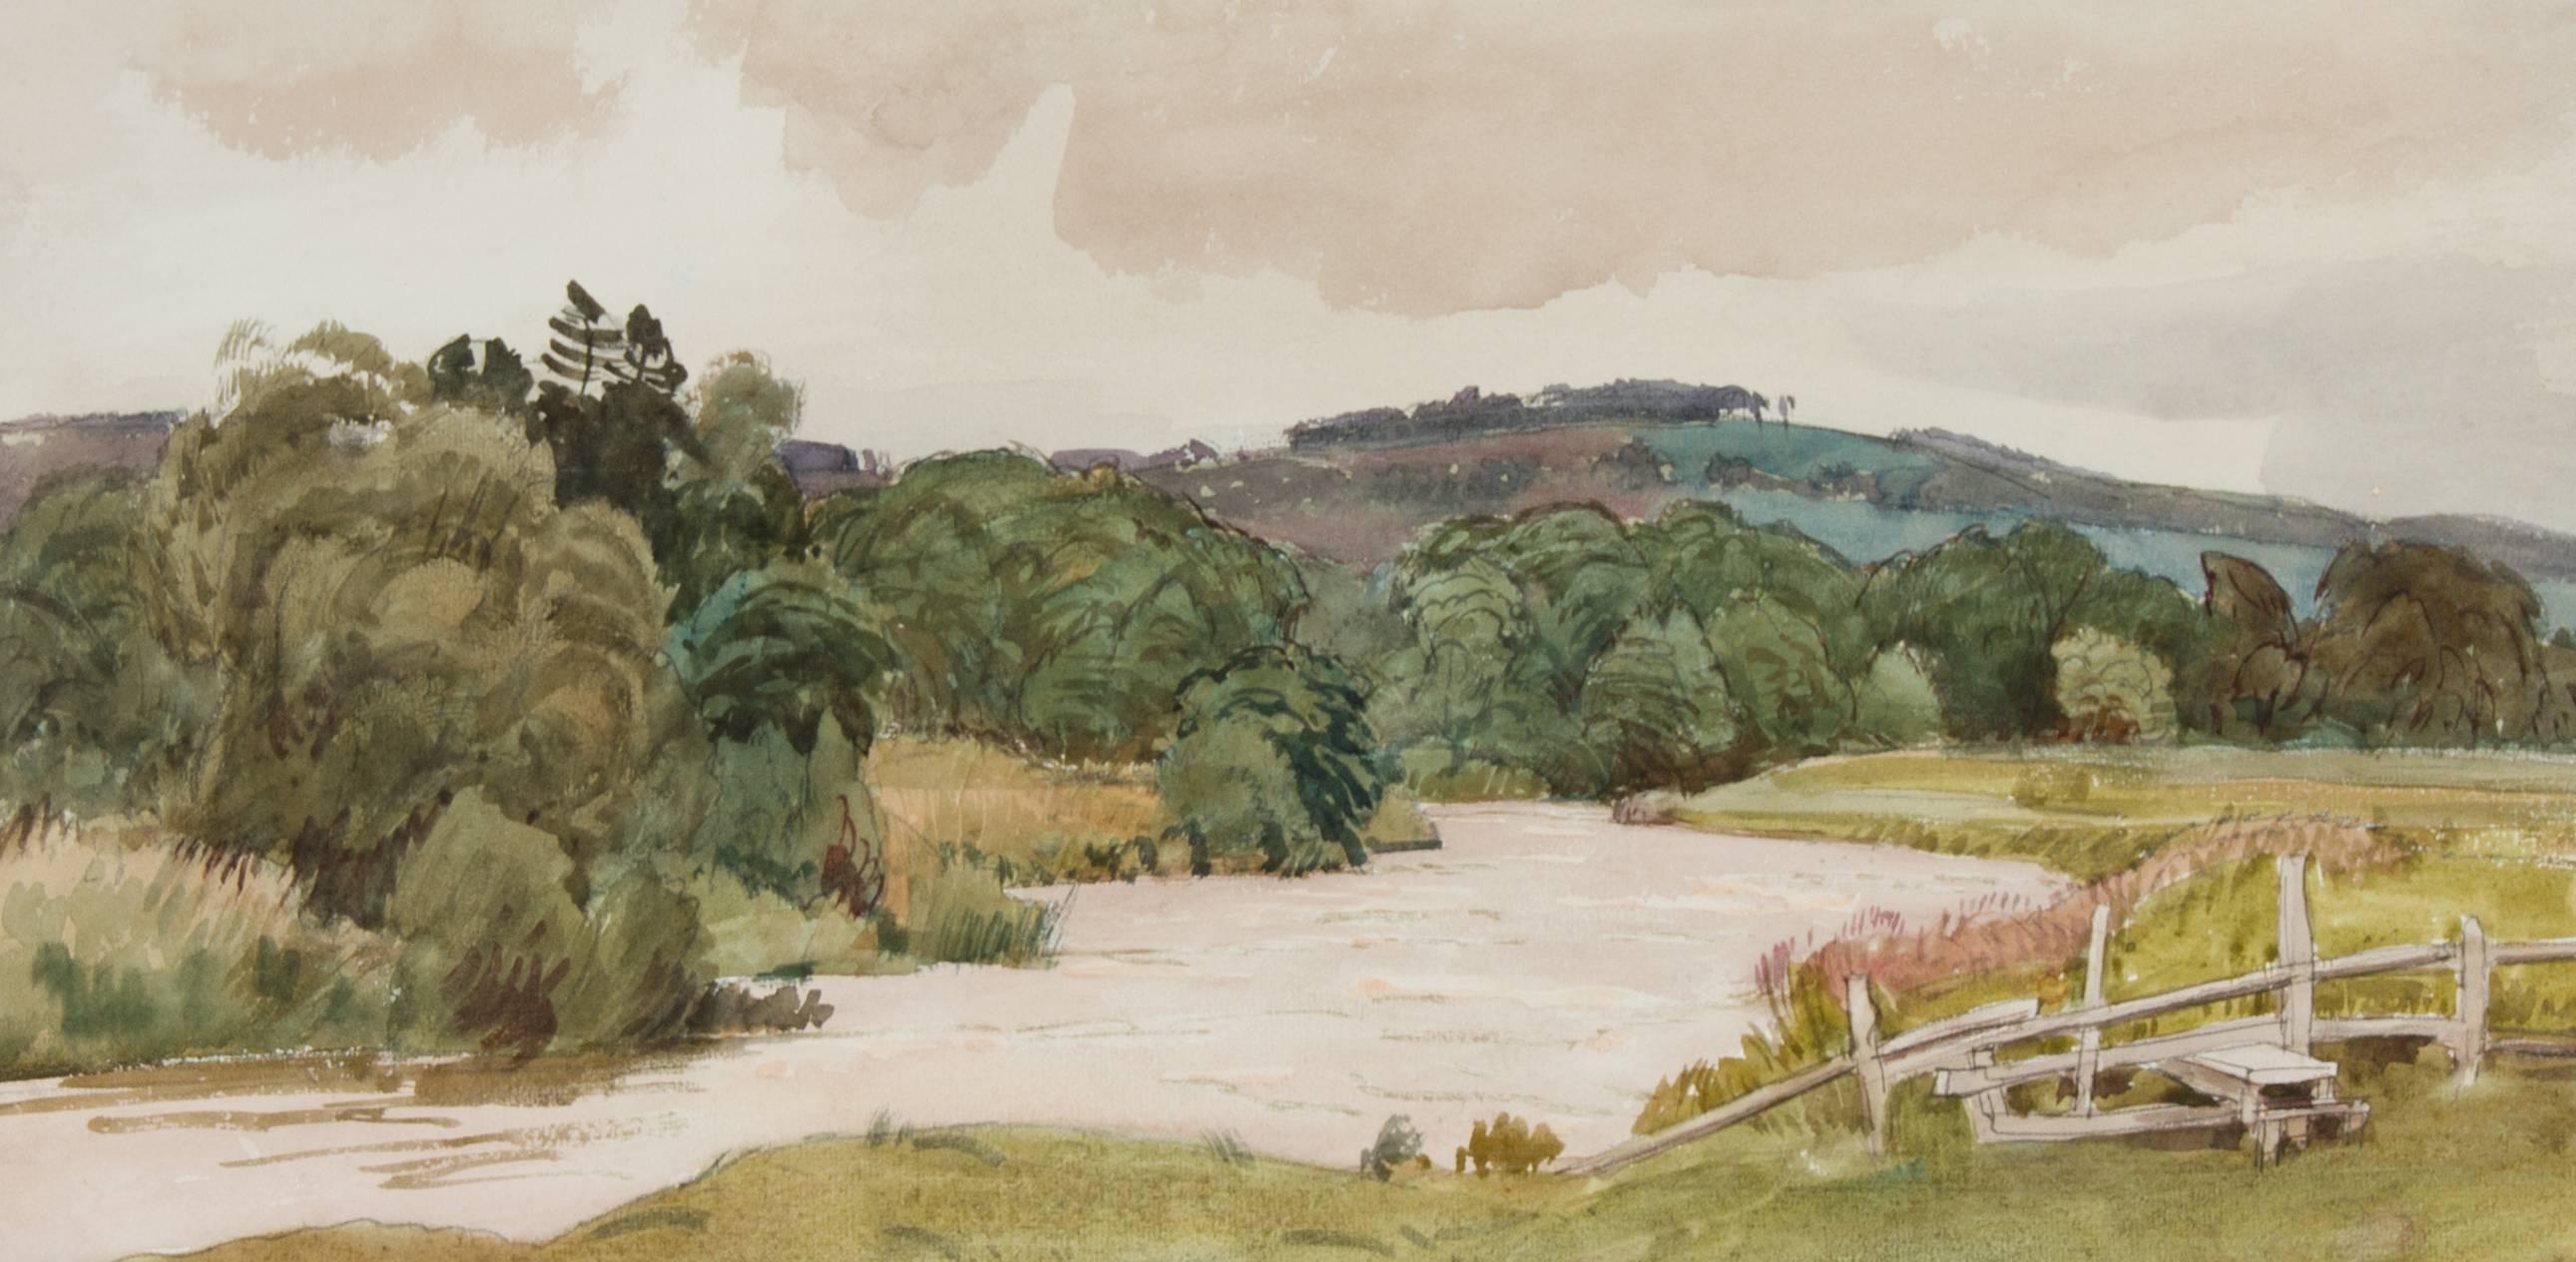 A signed and exhibited 1934 Watercolour by British artist Cedric Kennedy (1898-1963) . This superb watercolour was previously exhibited at the Cheltenham Art Gallery's 'Cedric Kennedy Memorial Exhibition of Paintings', no. 43, 1969. It was also